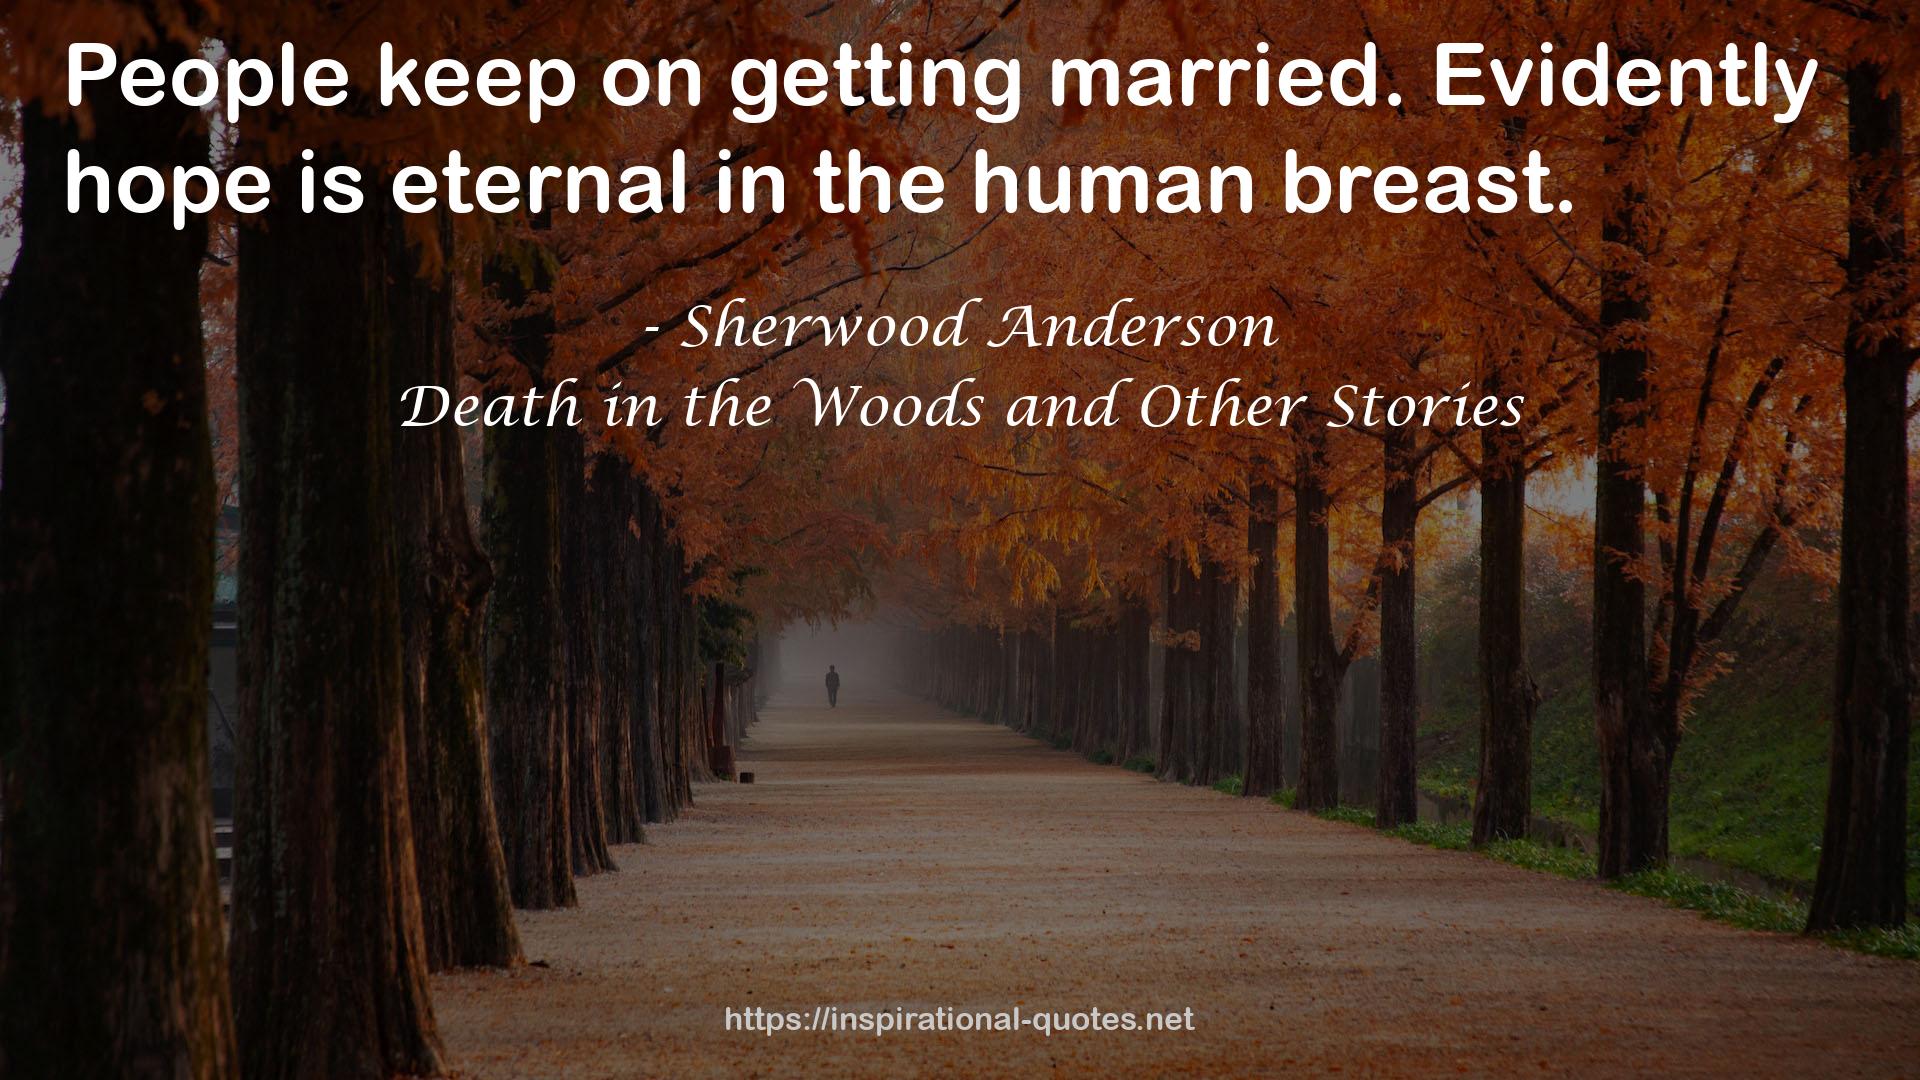 Death in the Woods and Other Stories QUOTES